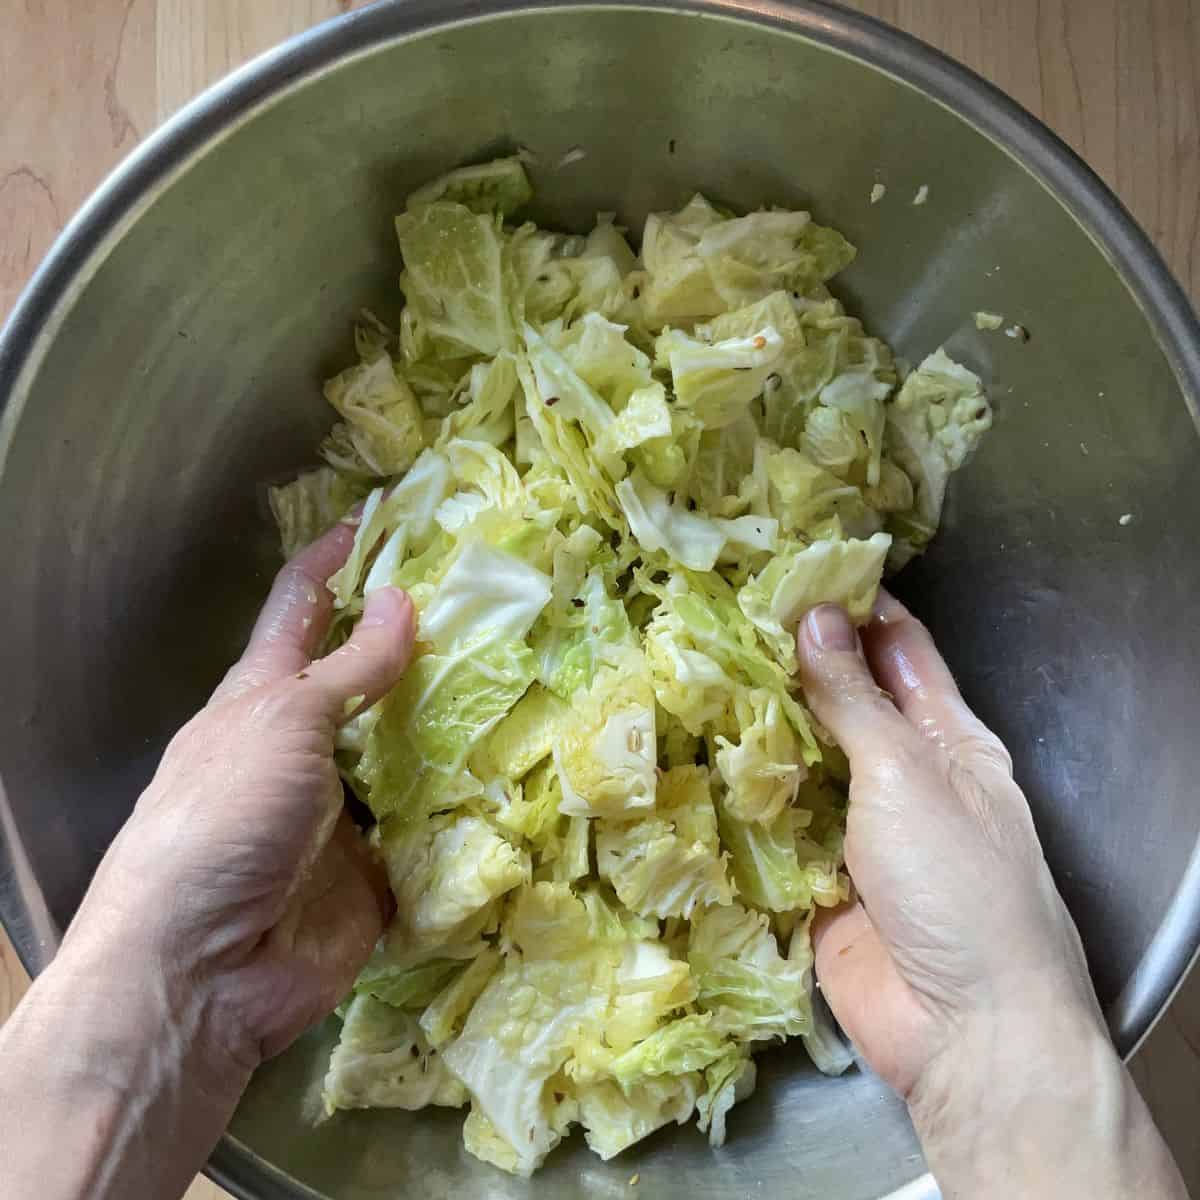 Chopped cabbage being tossed in a large bowl.